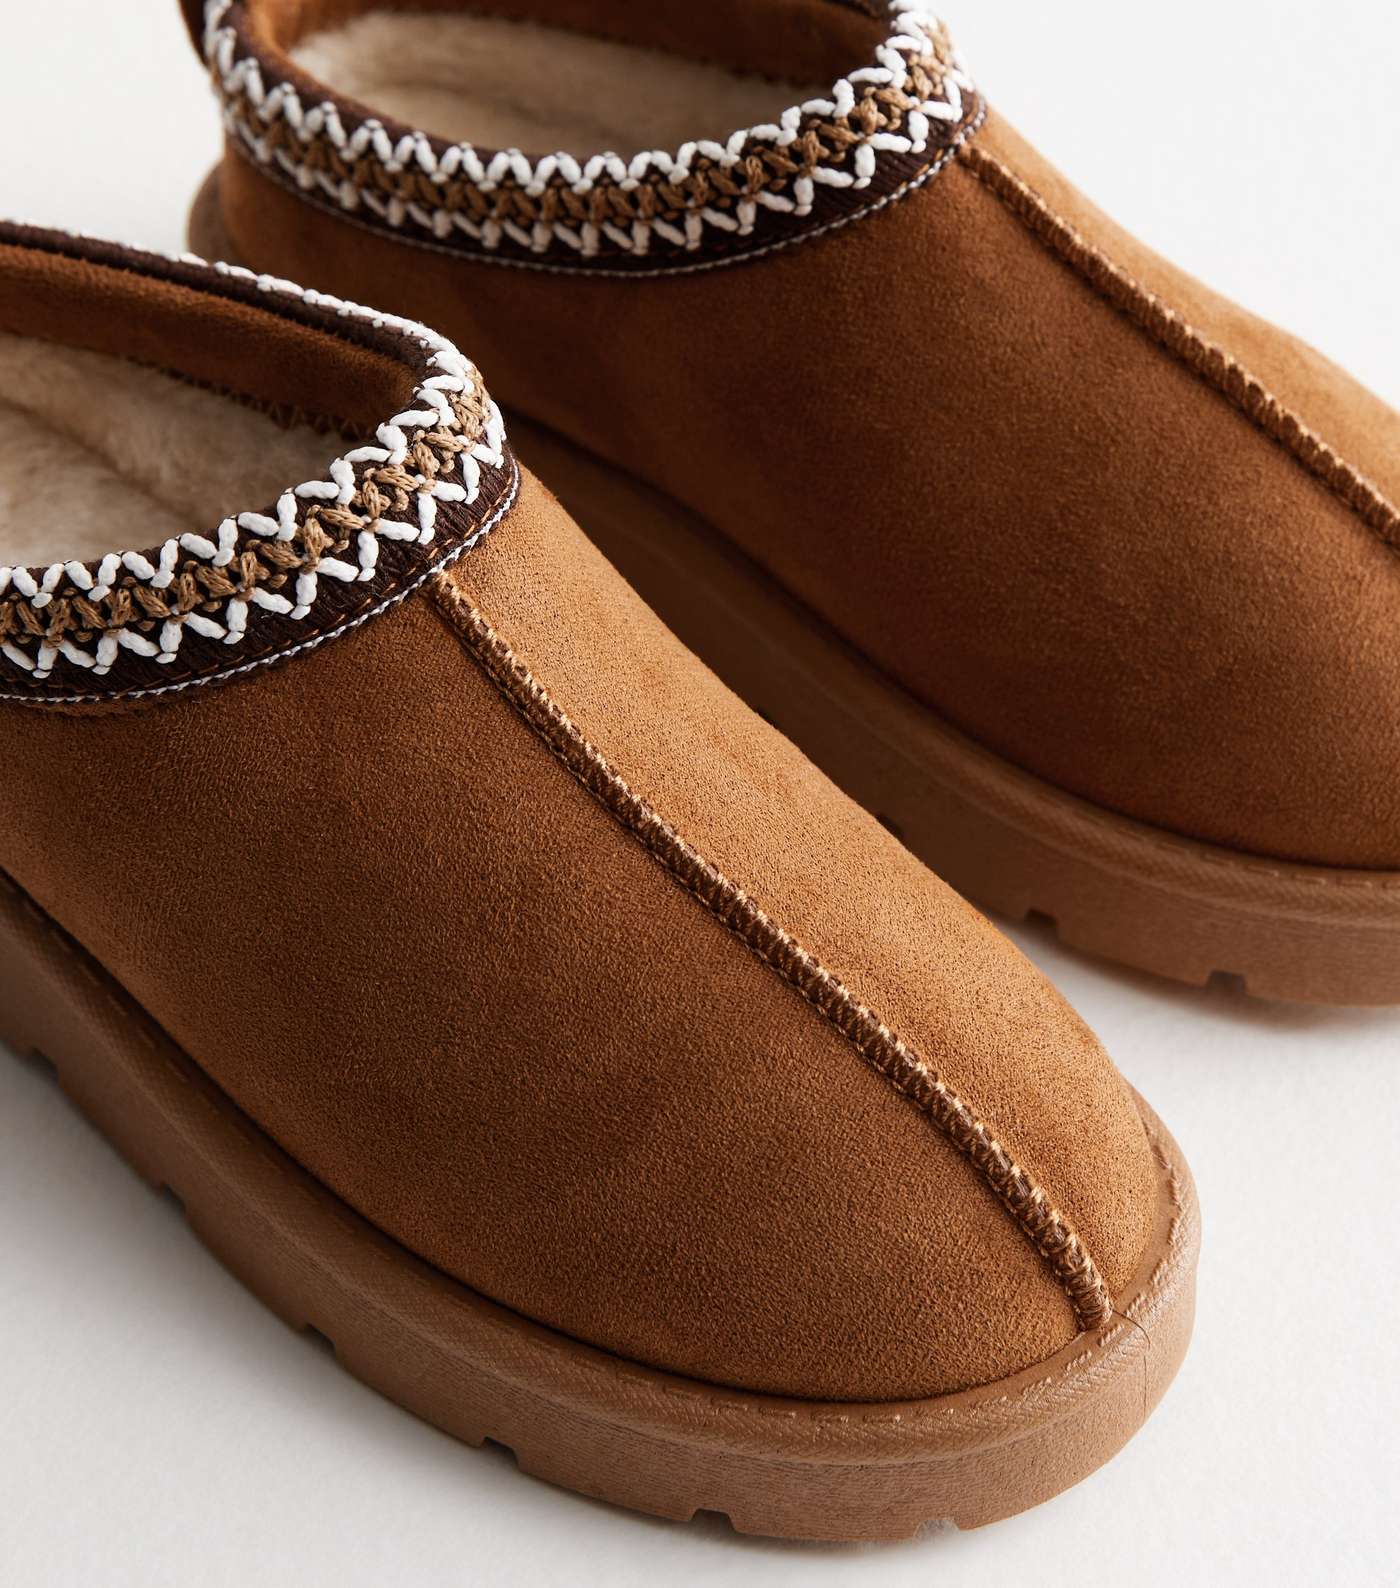 Truffle Tan Suedette Embroidered Trim Slippers Image 3